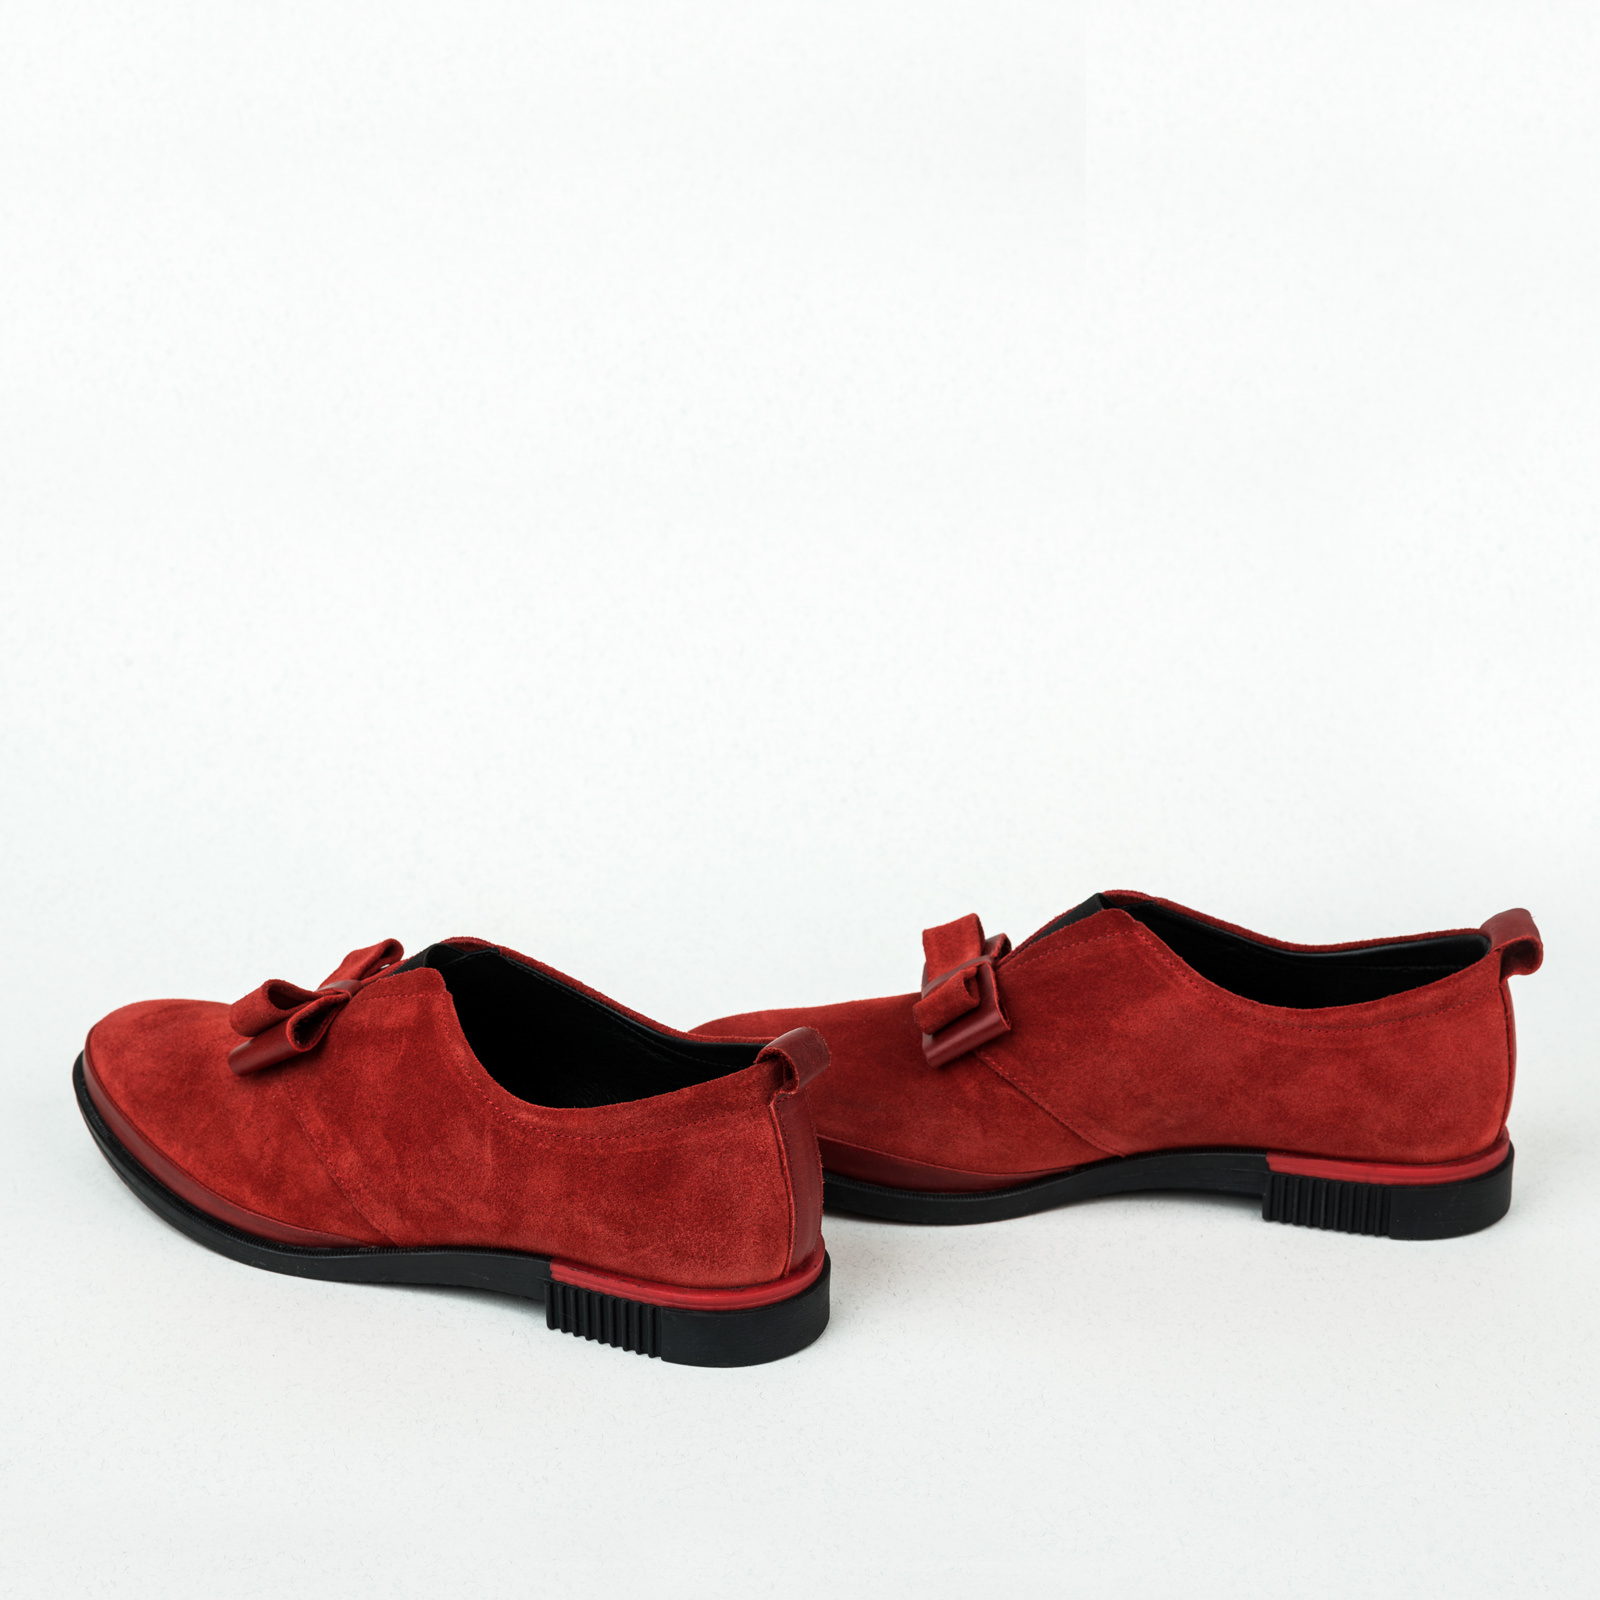 Leather shoes & flats B016 - CORAL